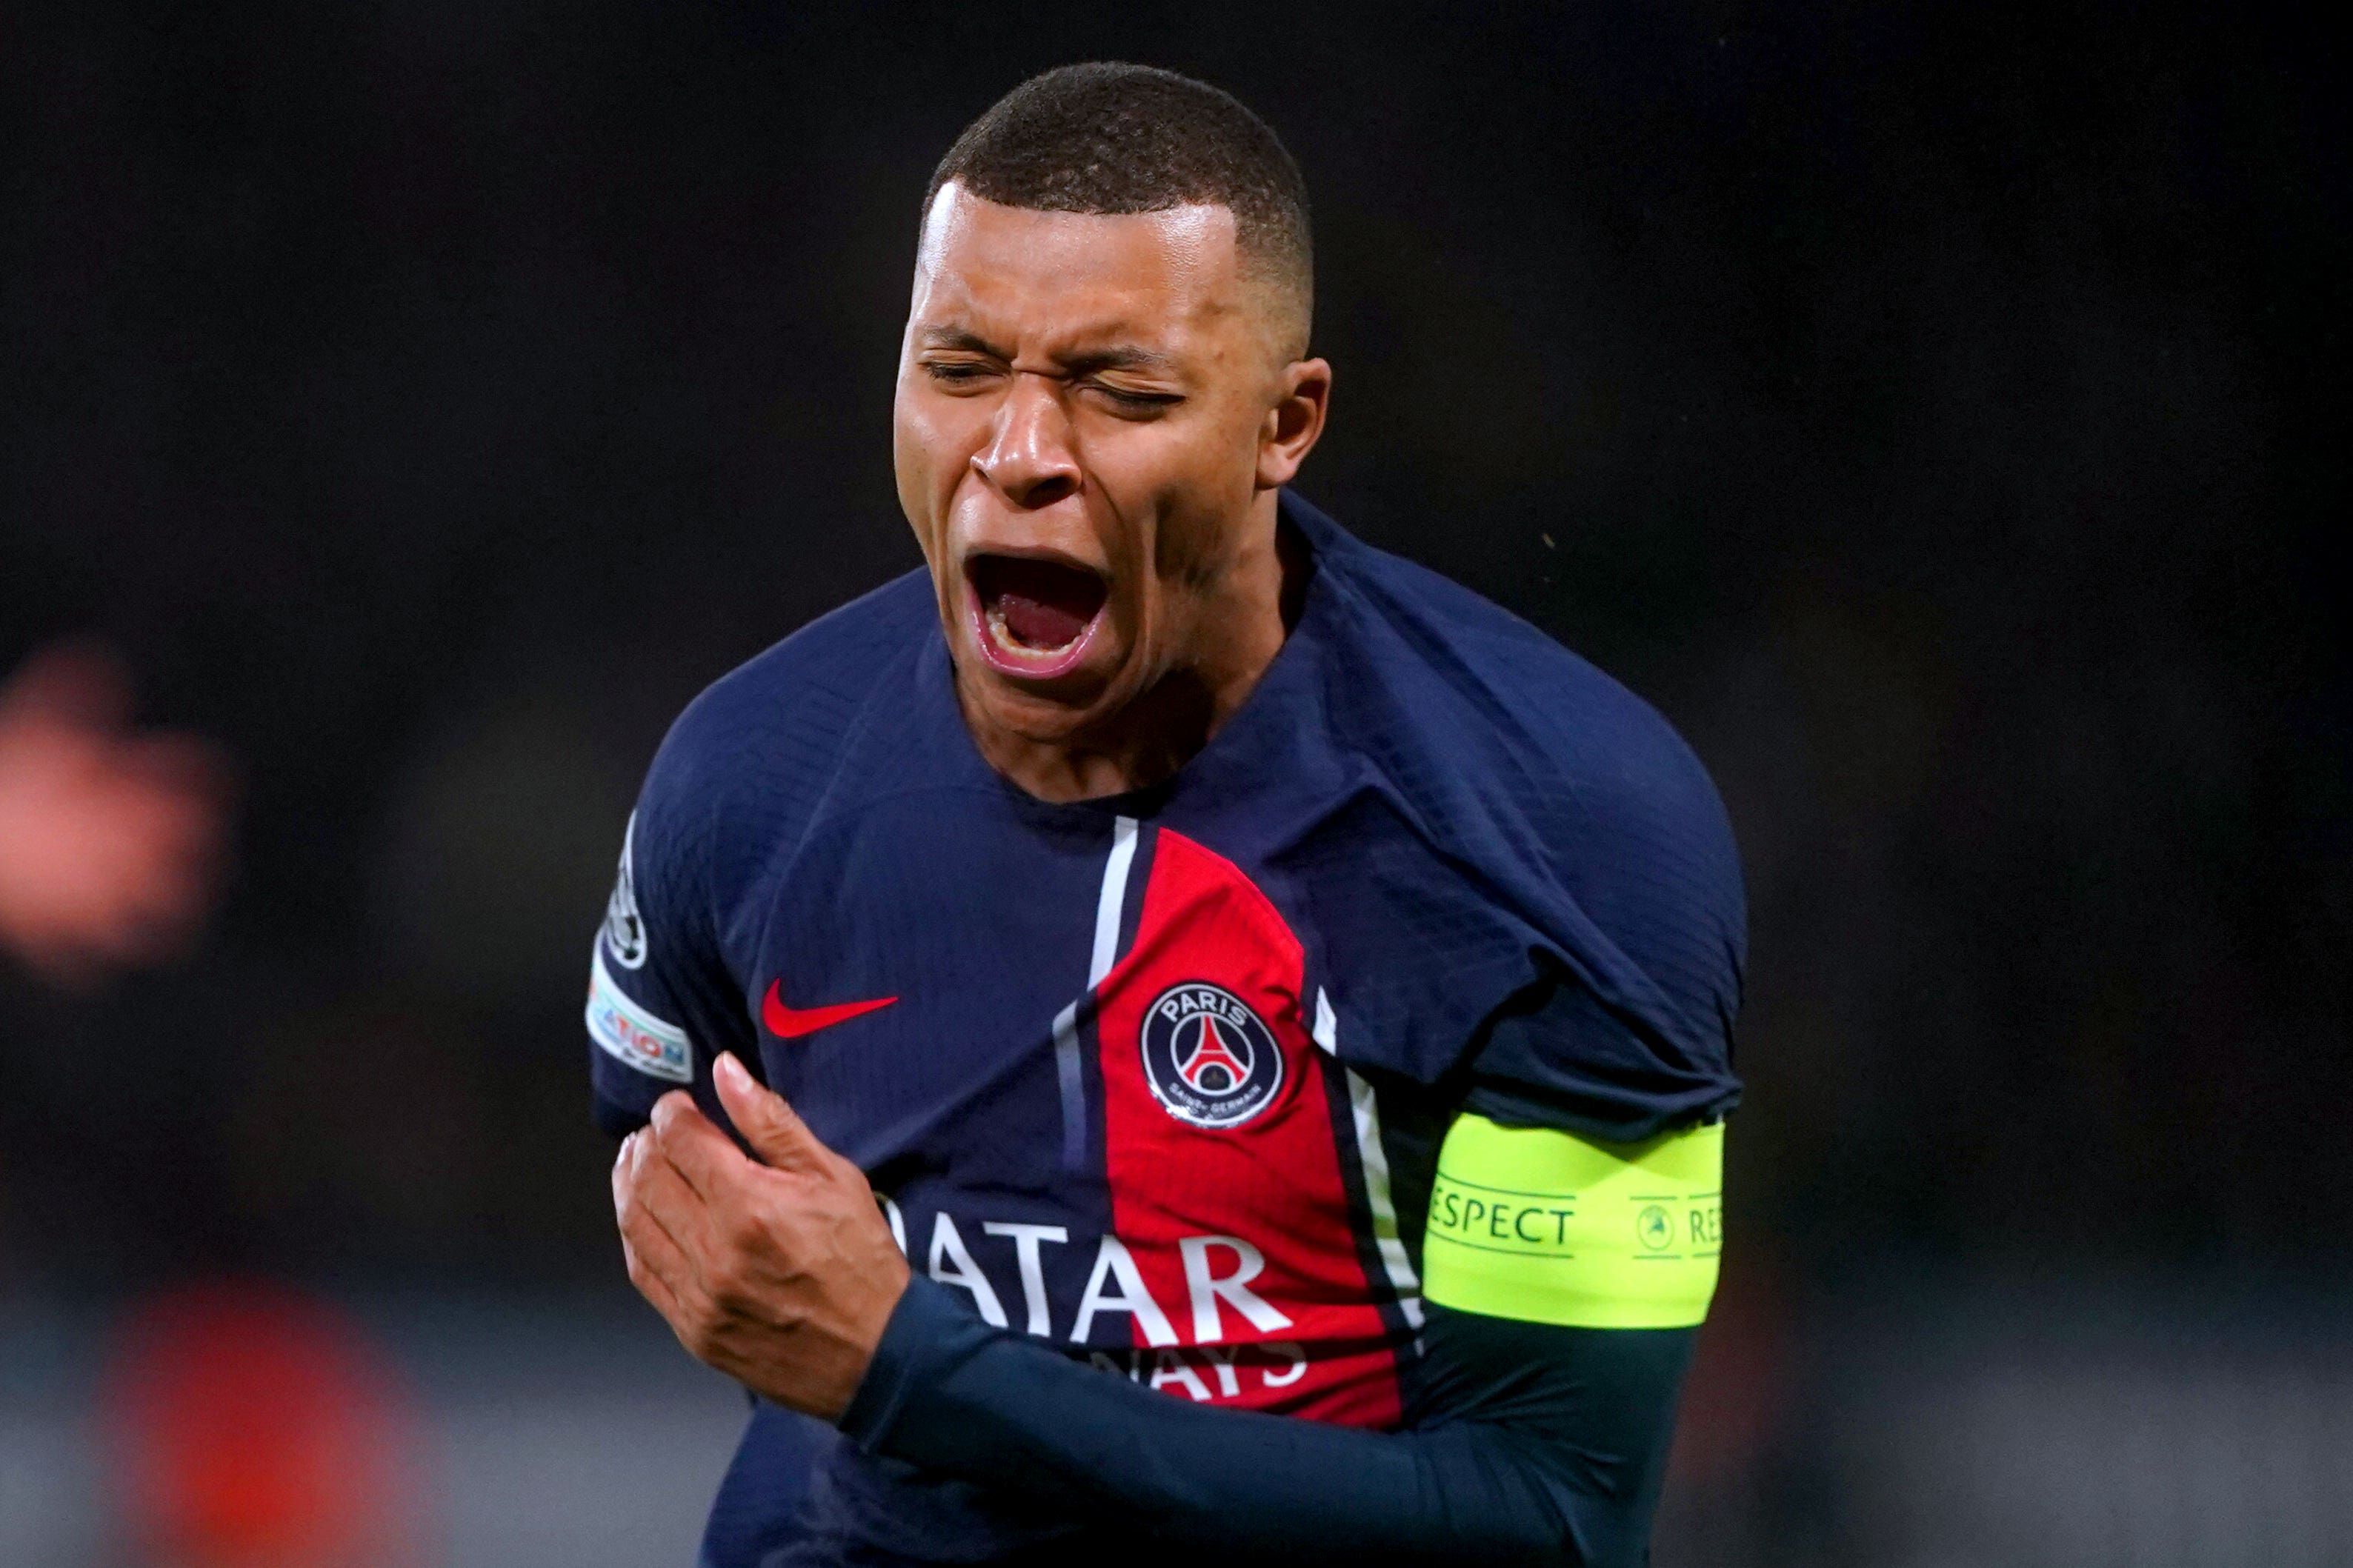 Kylian Mbappe opened the scoring for PSG (Owen Humphreys/PA)